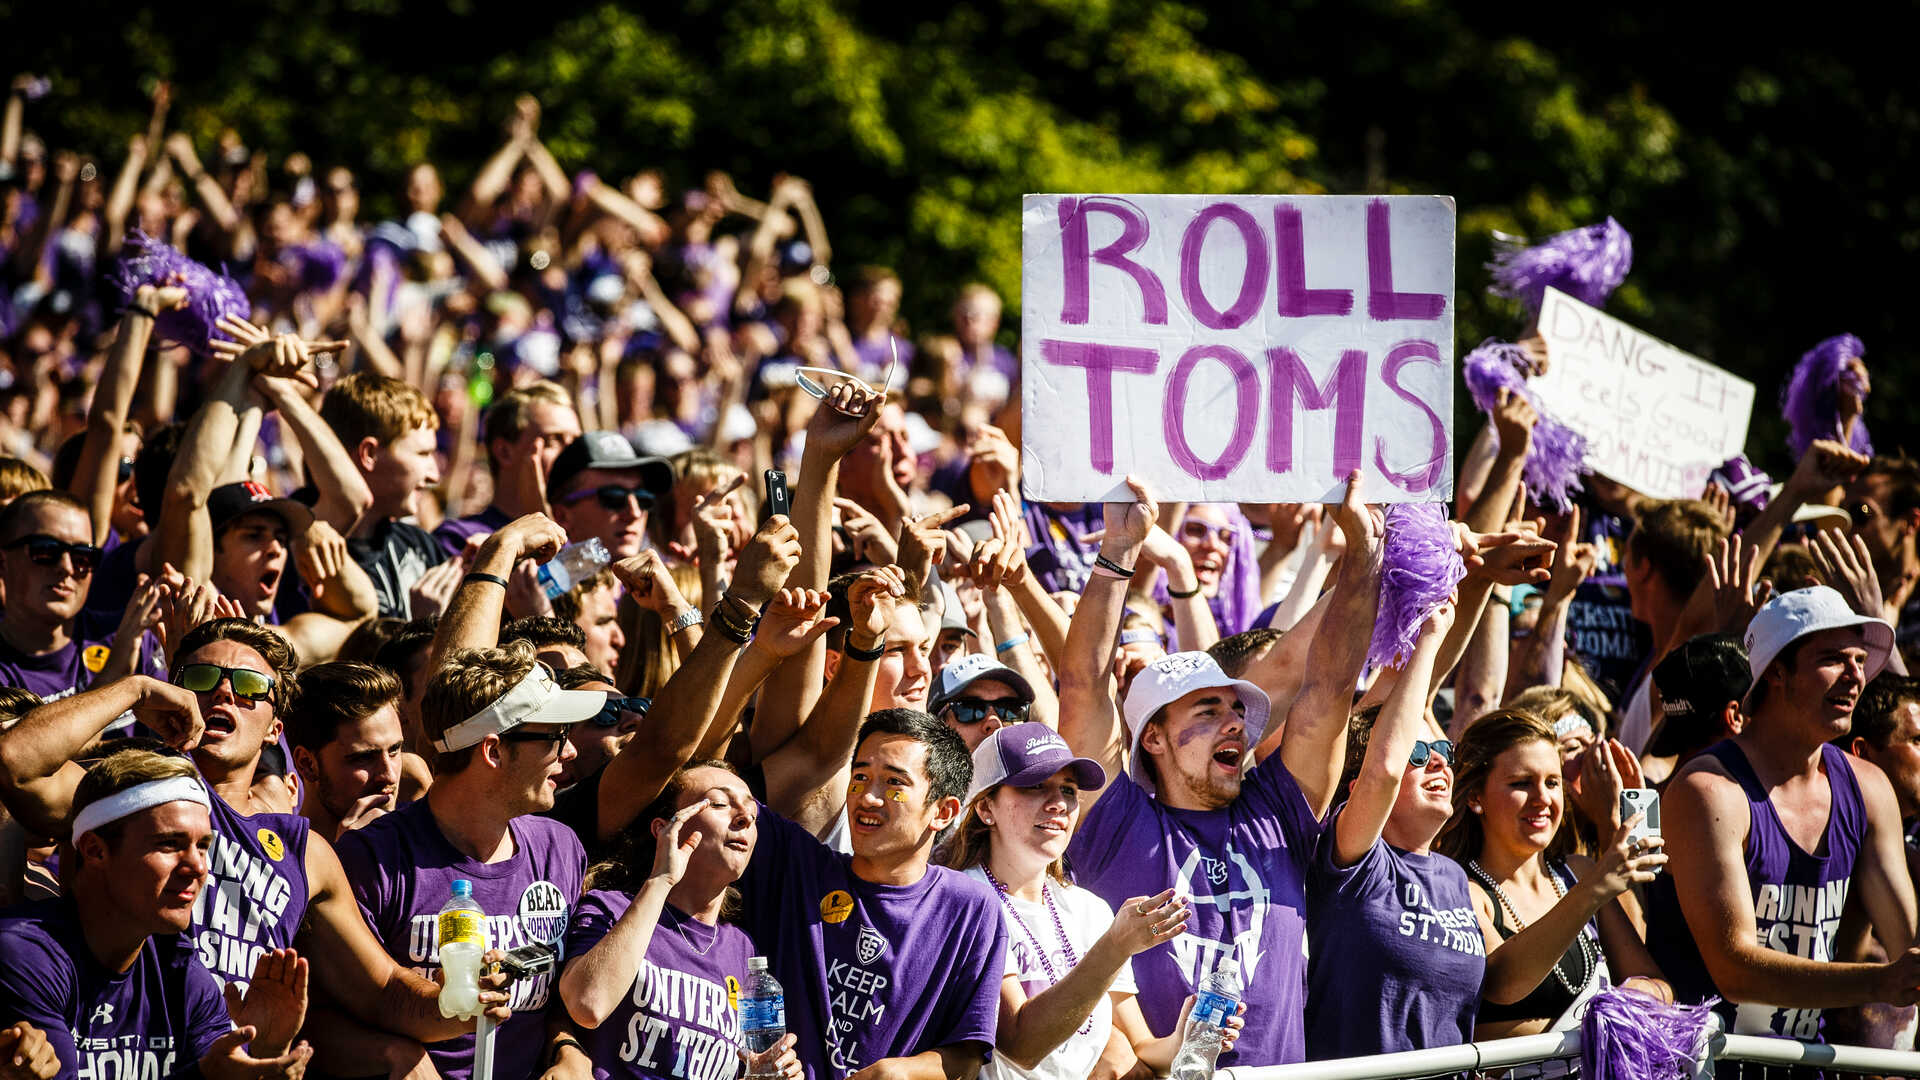 UST students cheer on the Tommies during the annual Tommie Johnnie football game at Clemens Stadium at Saint John's University in Collegeville, Minnesota, on September 26, 2015. St. Thomas won the game by a final score of 35-14.